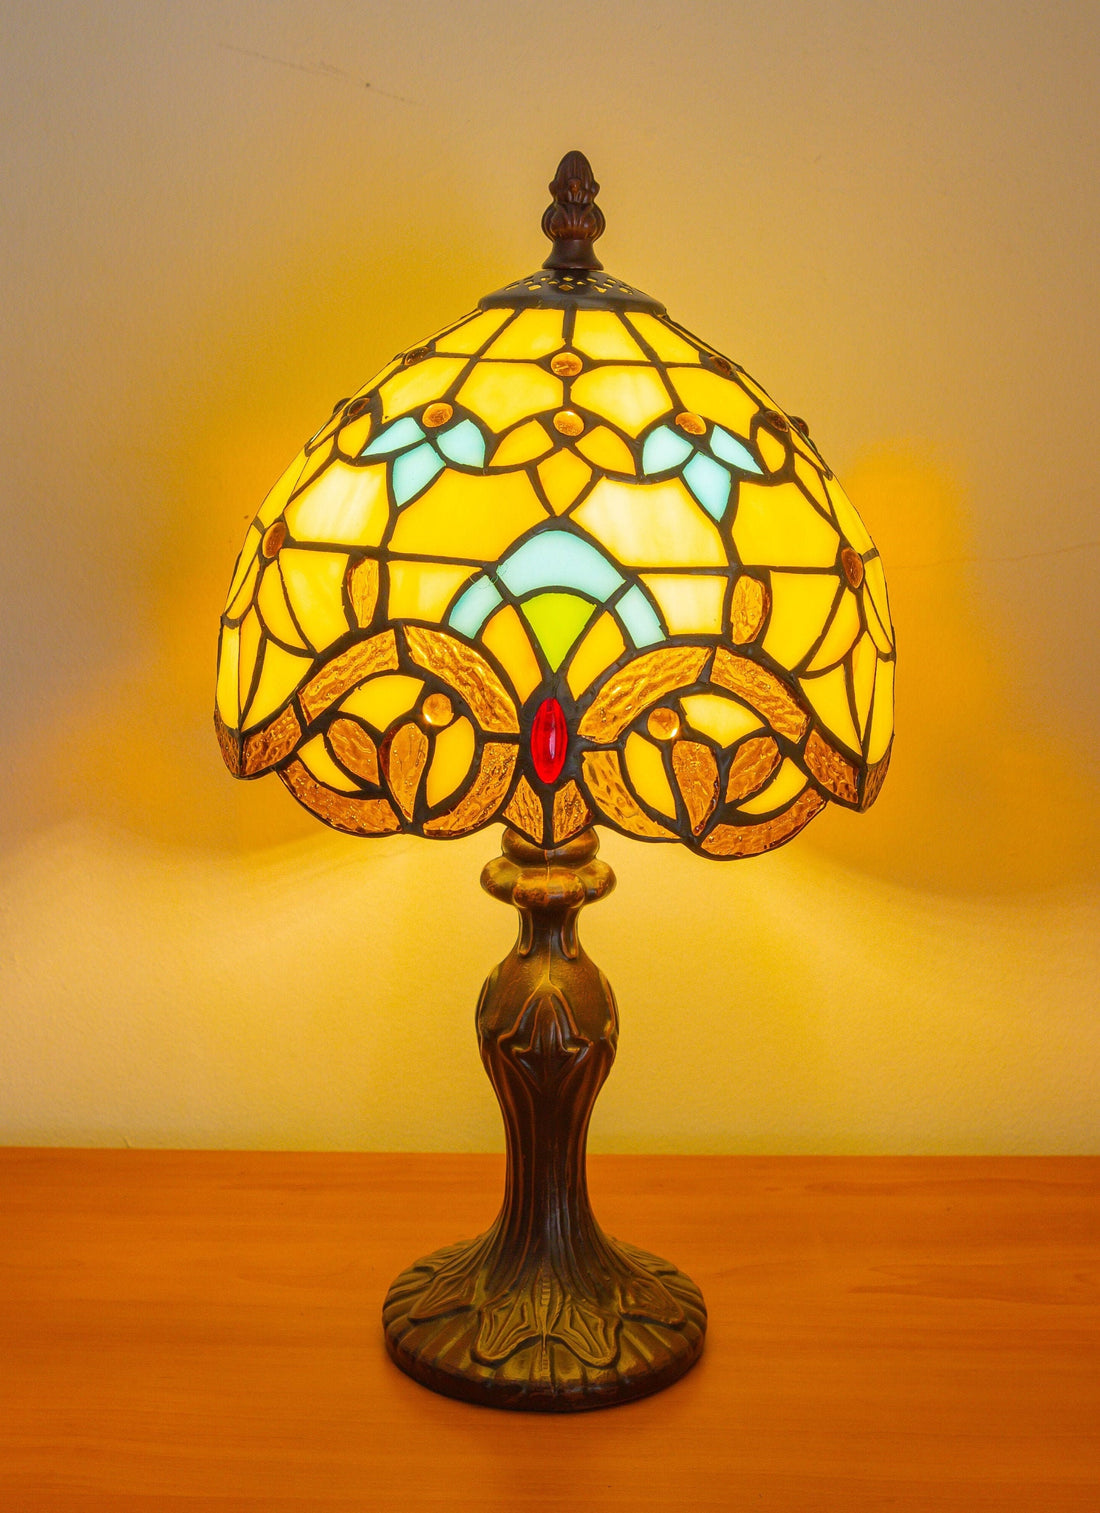 Crown Tiffany Lamp, Leadglass Stained Glass Shade, Crystal Bead Lamp Shade, Antique Lampshade, Stained Glass Lamp Shade, Bedside Lamp